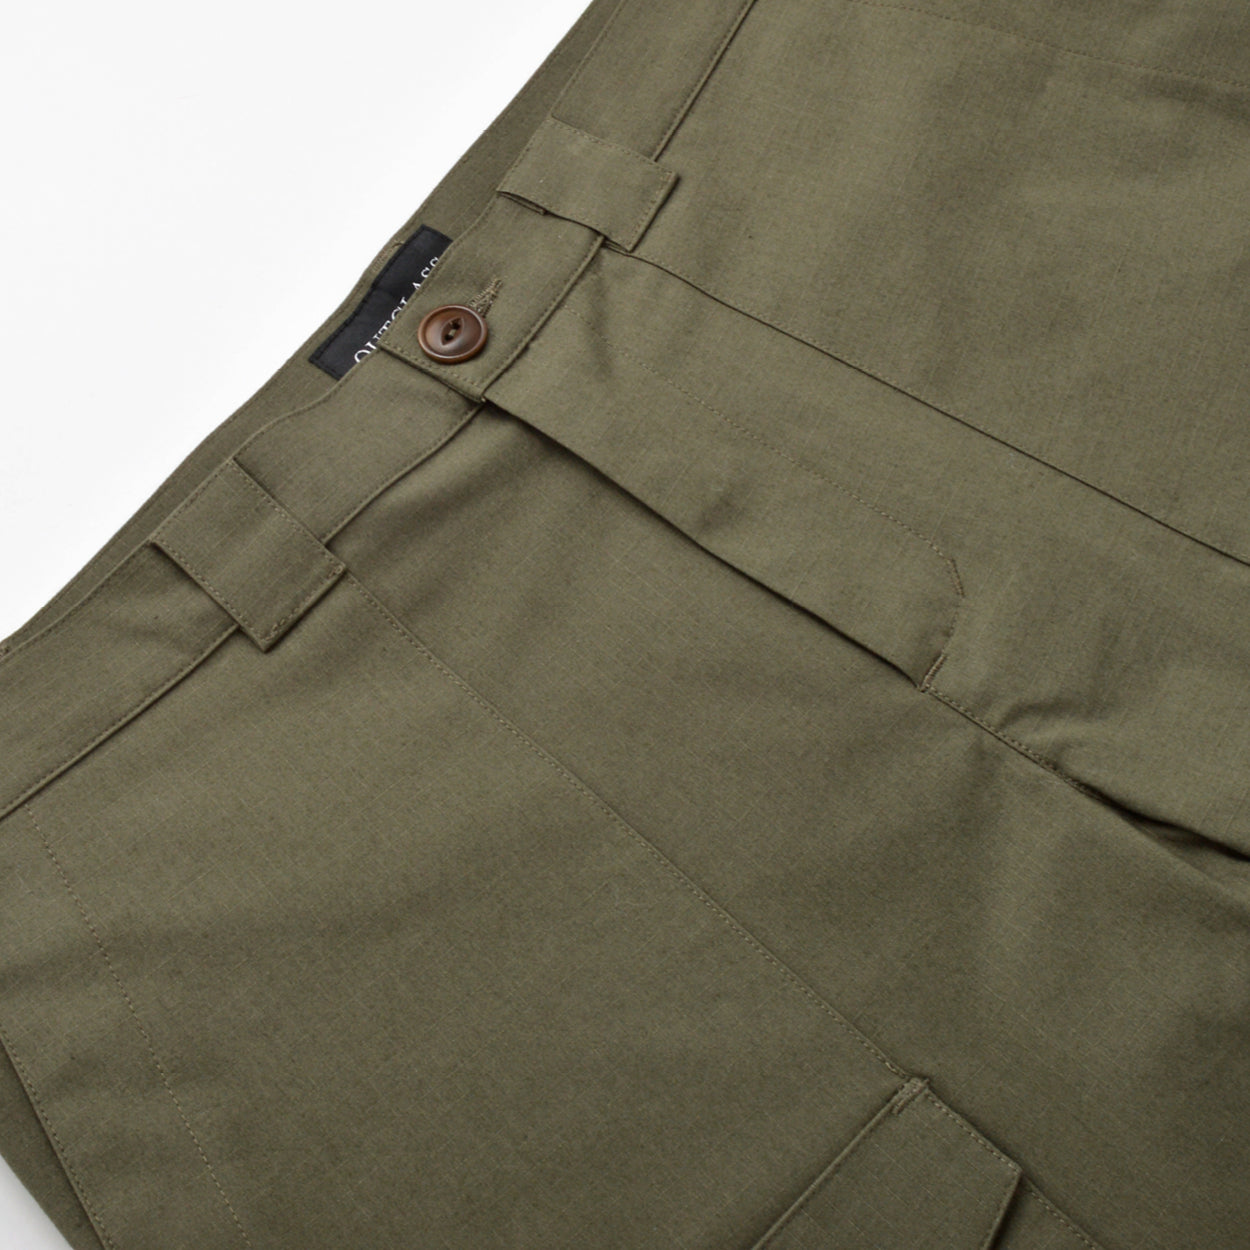 Olive Expedition Shorts